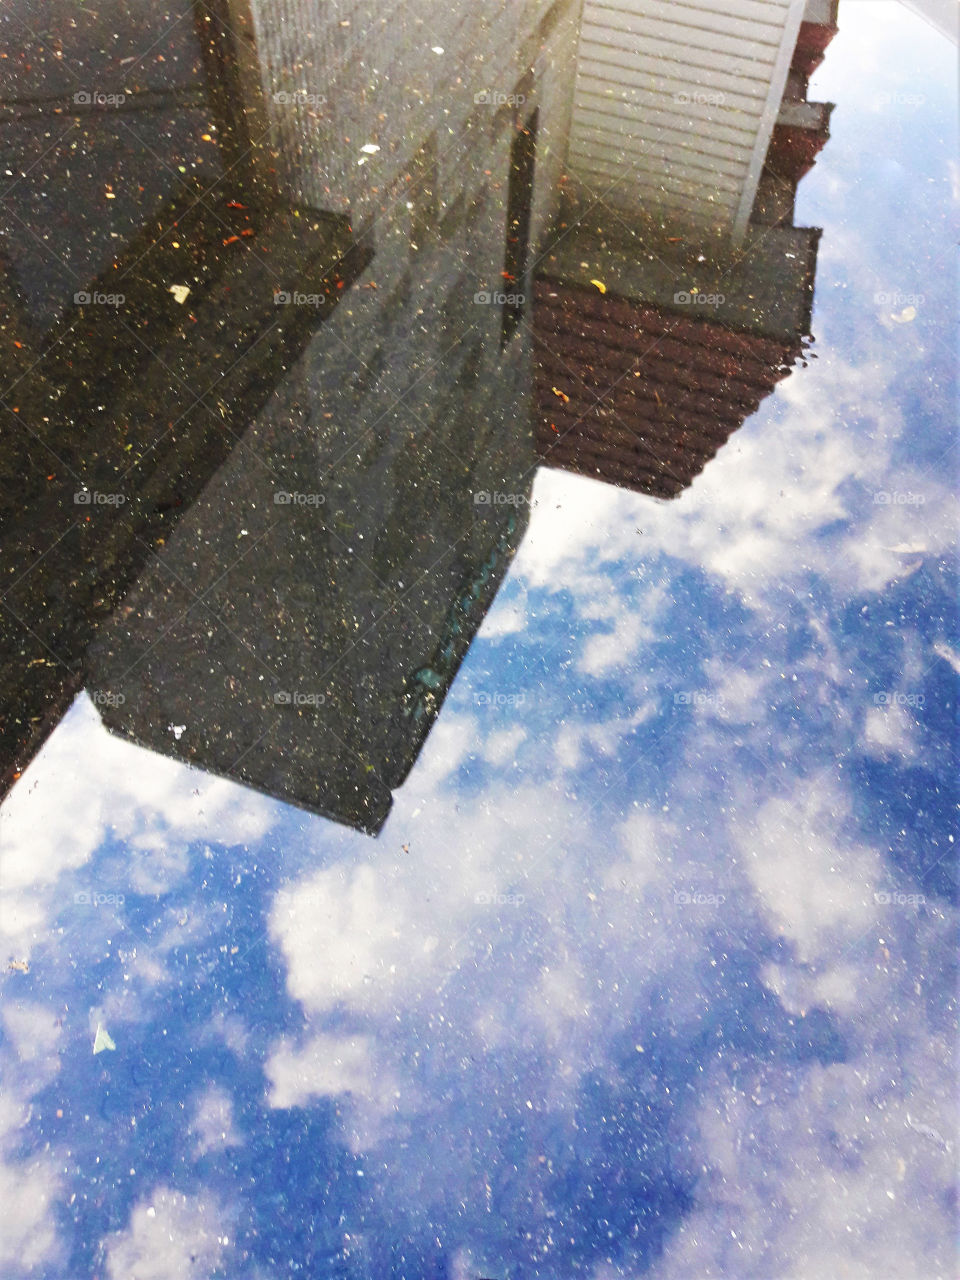 Reflection of the sky and a building in a puddle.